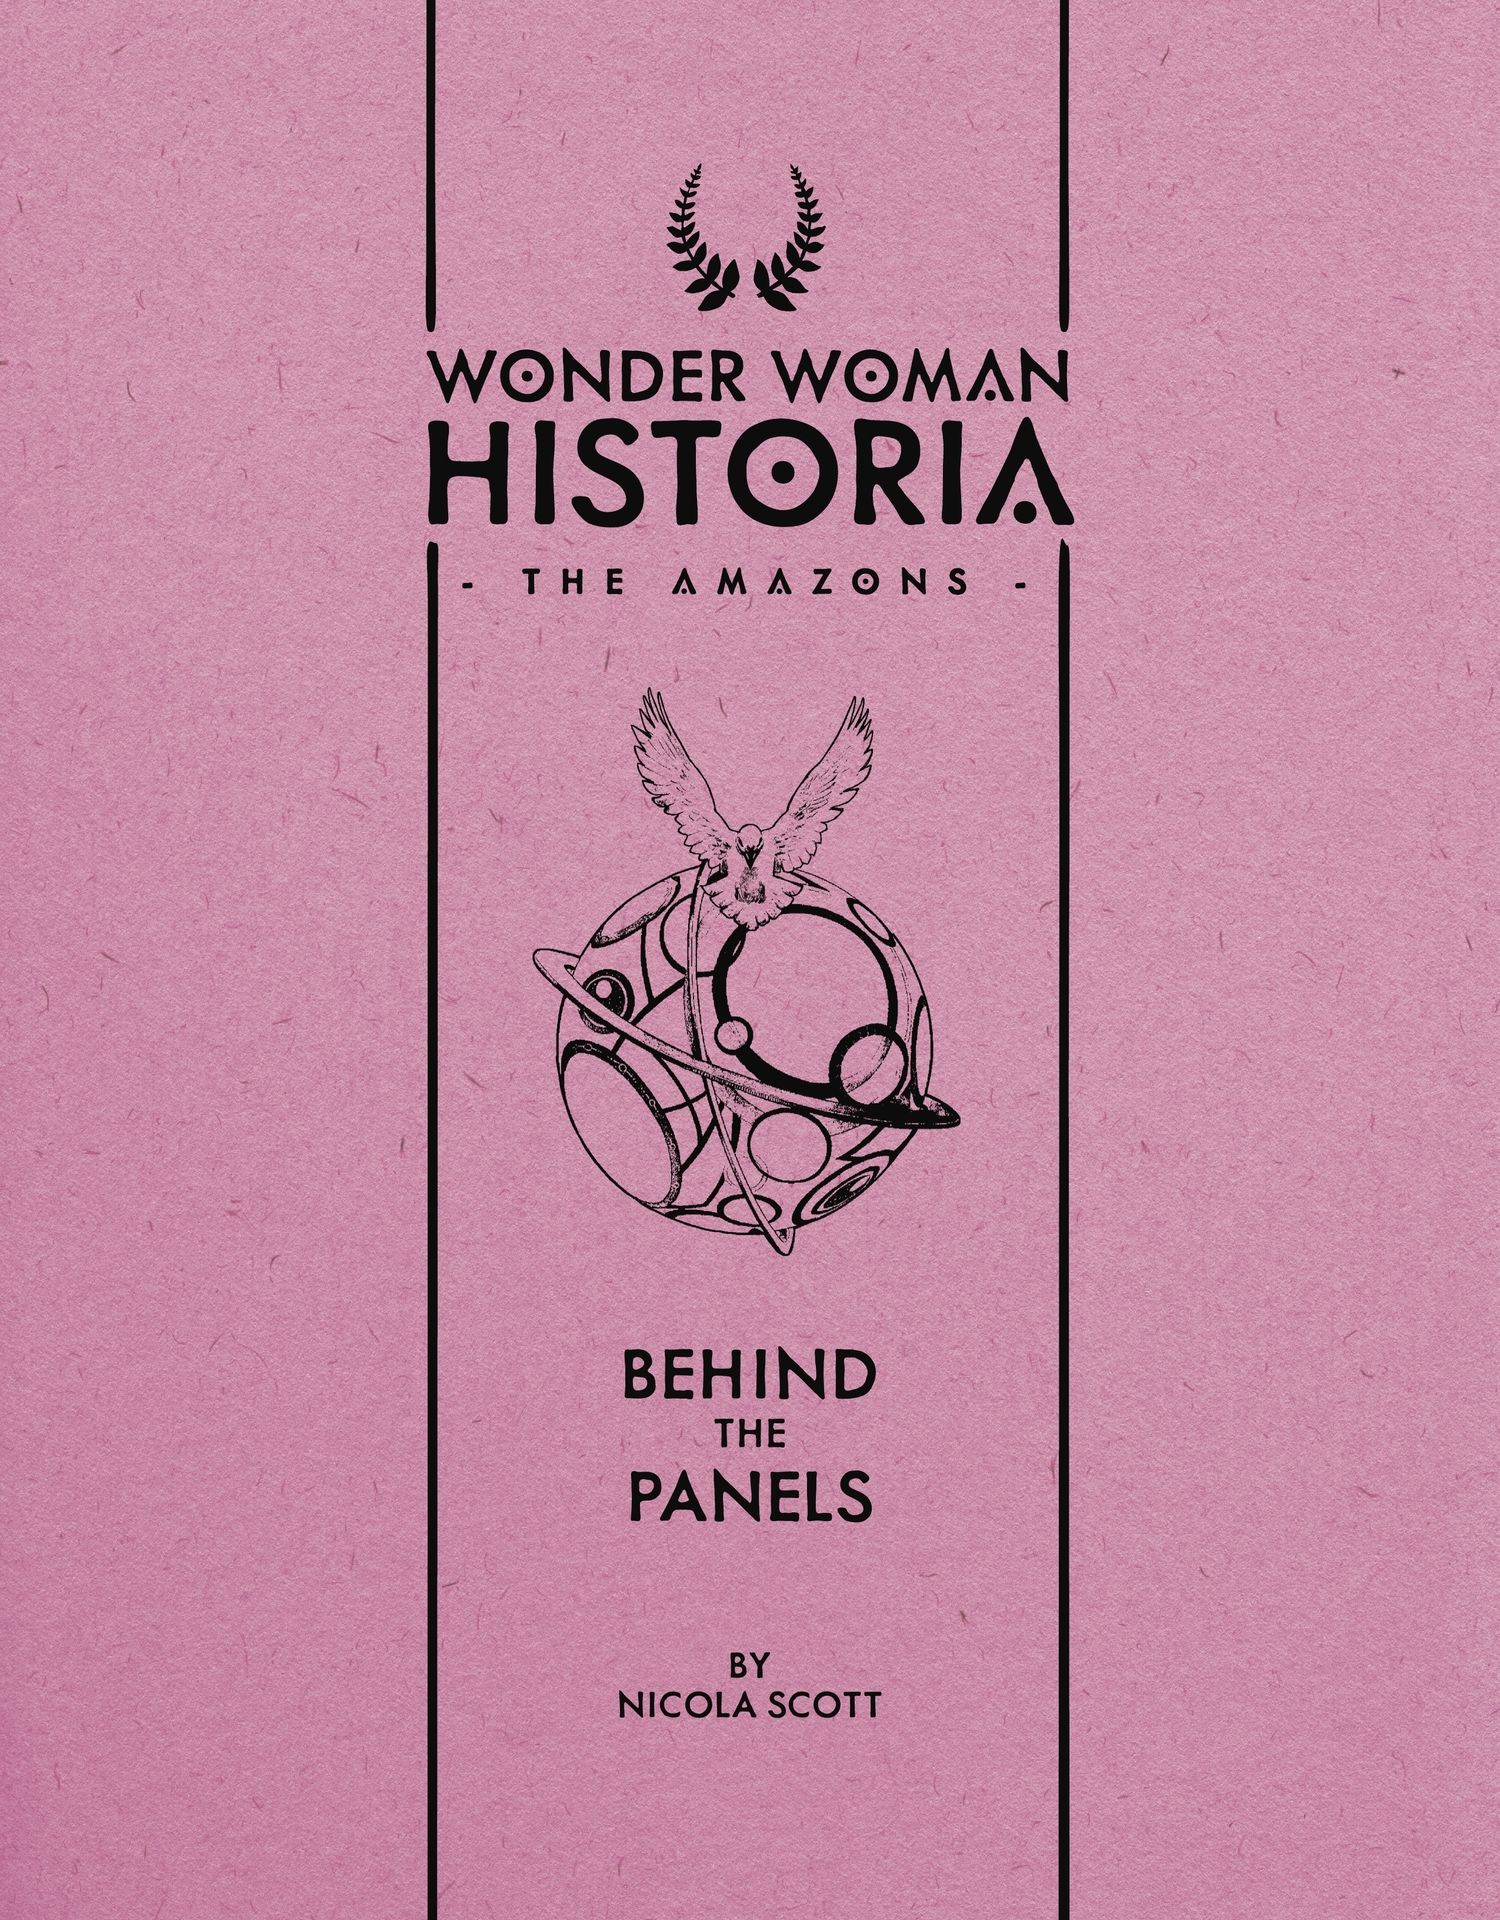 Read online Wonder Woman Historia: The Amazons comic -  Issue #3 - 61